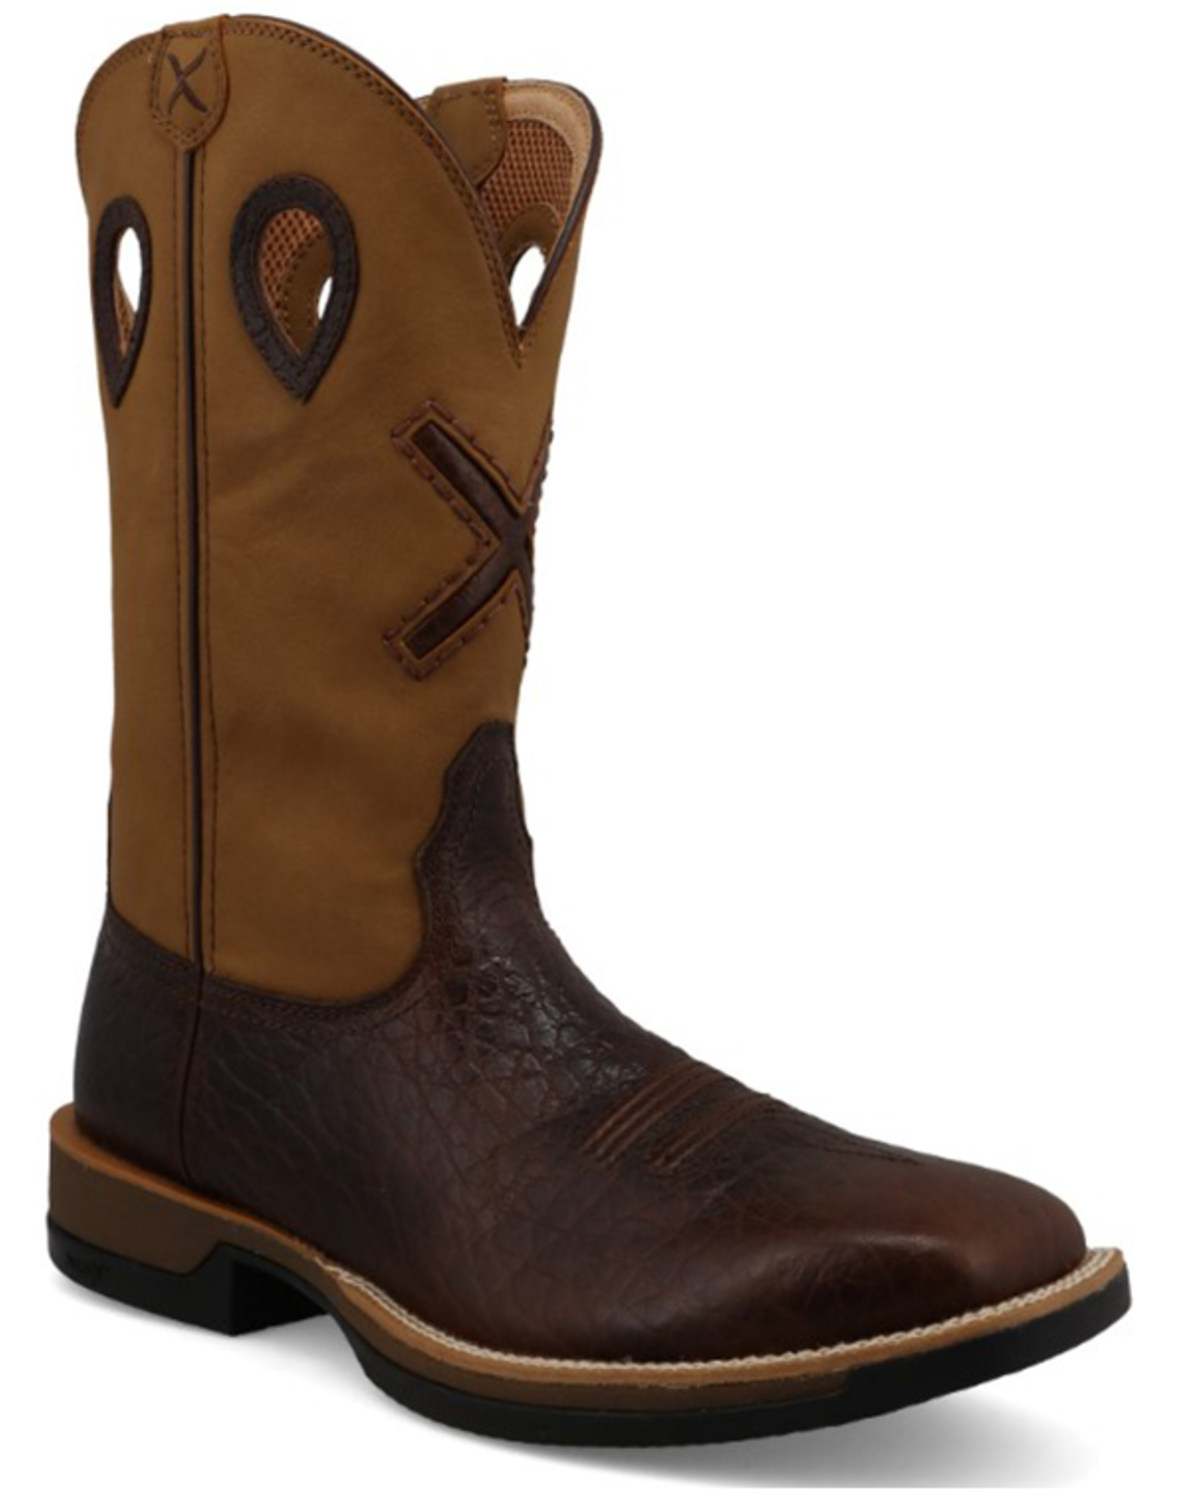 Twisted X Men's 12" Tech Western Performance Boots - Broad Square Toe